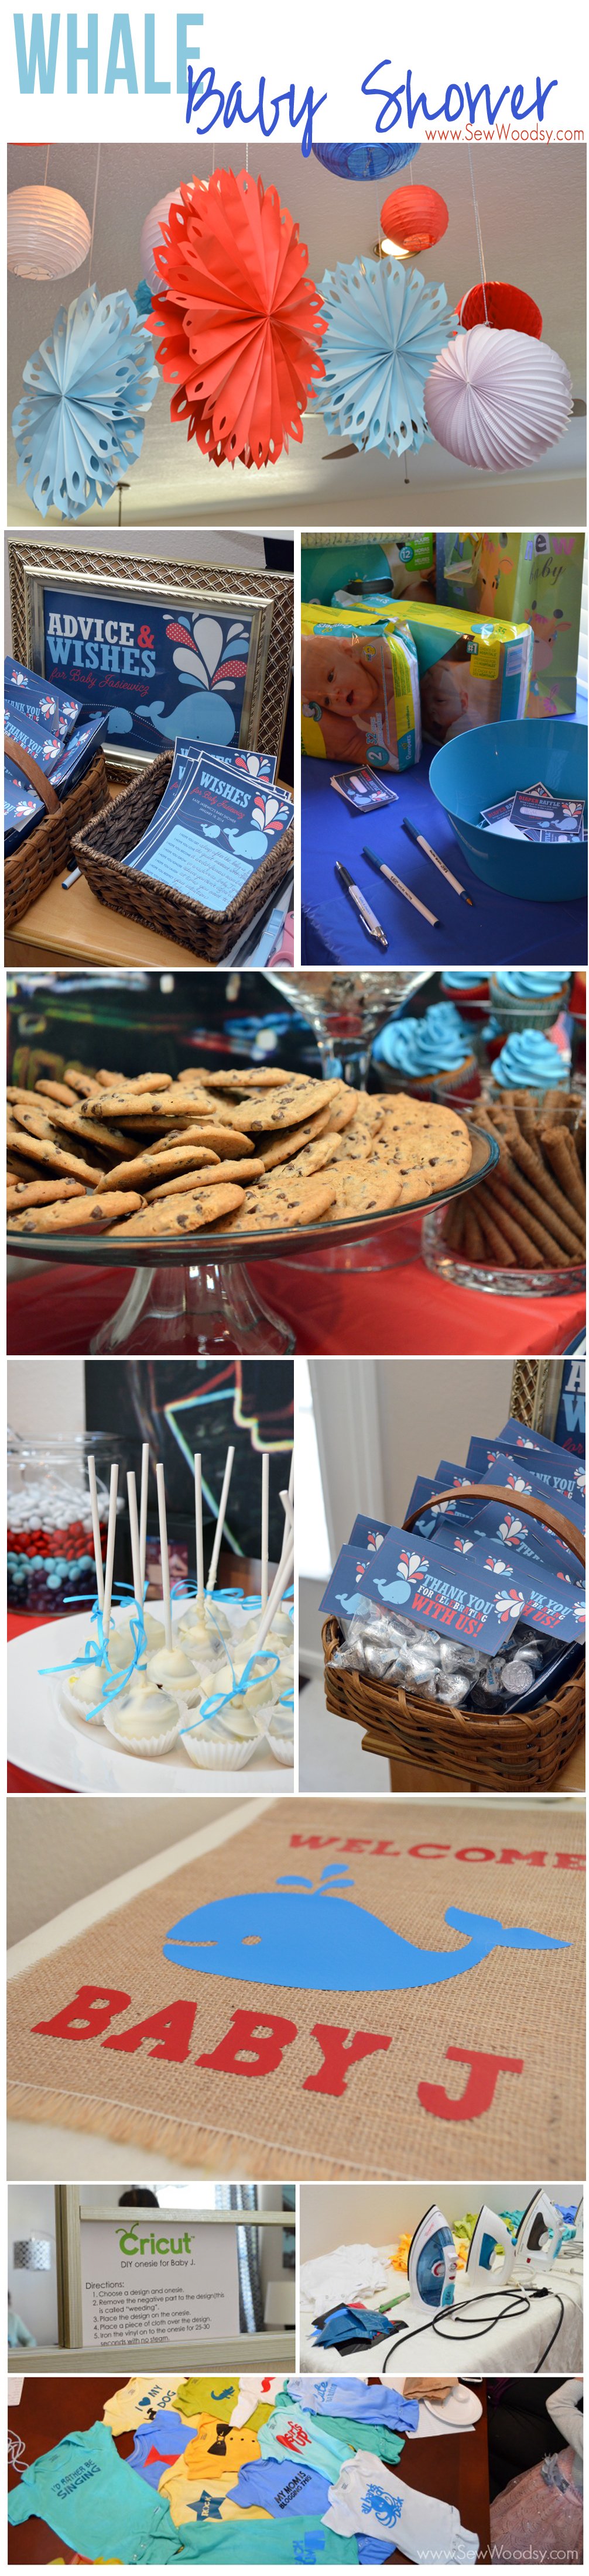 Great ideas for a Whale Baby Shower #boy #babyshower